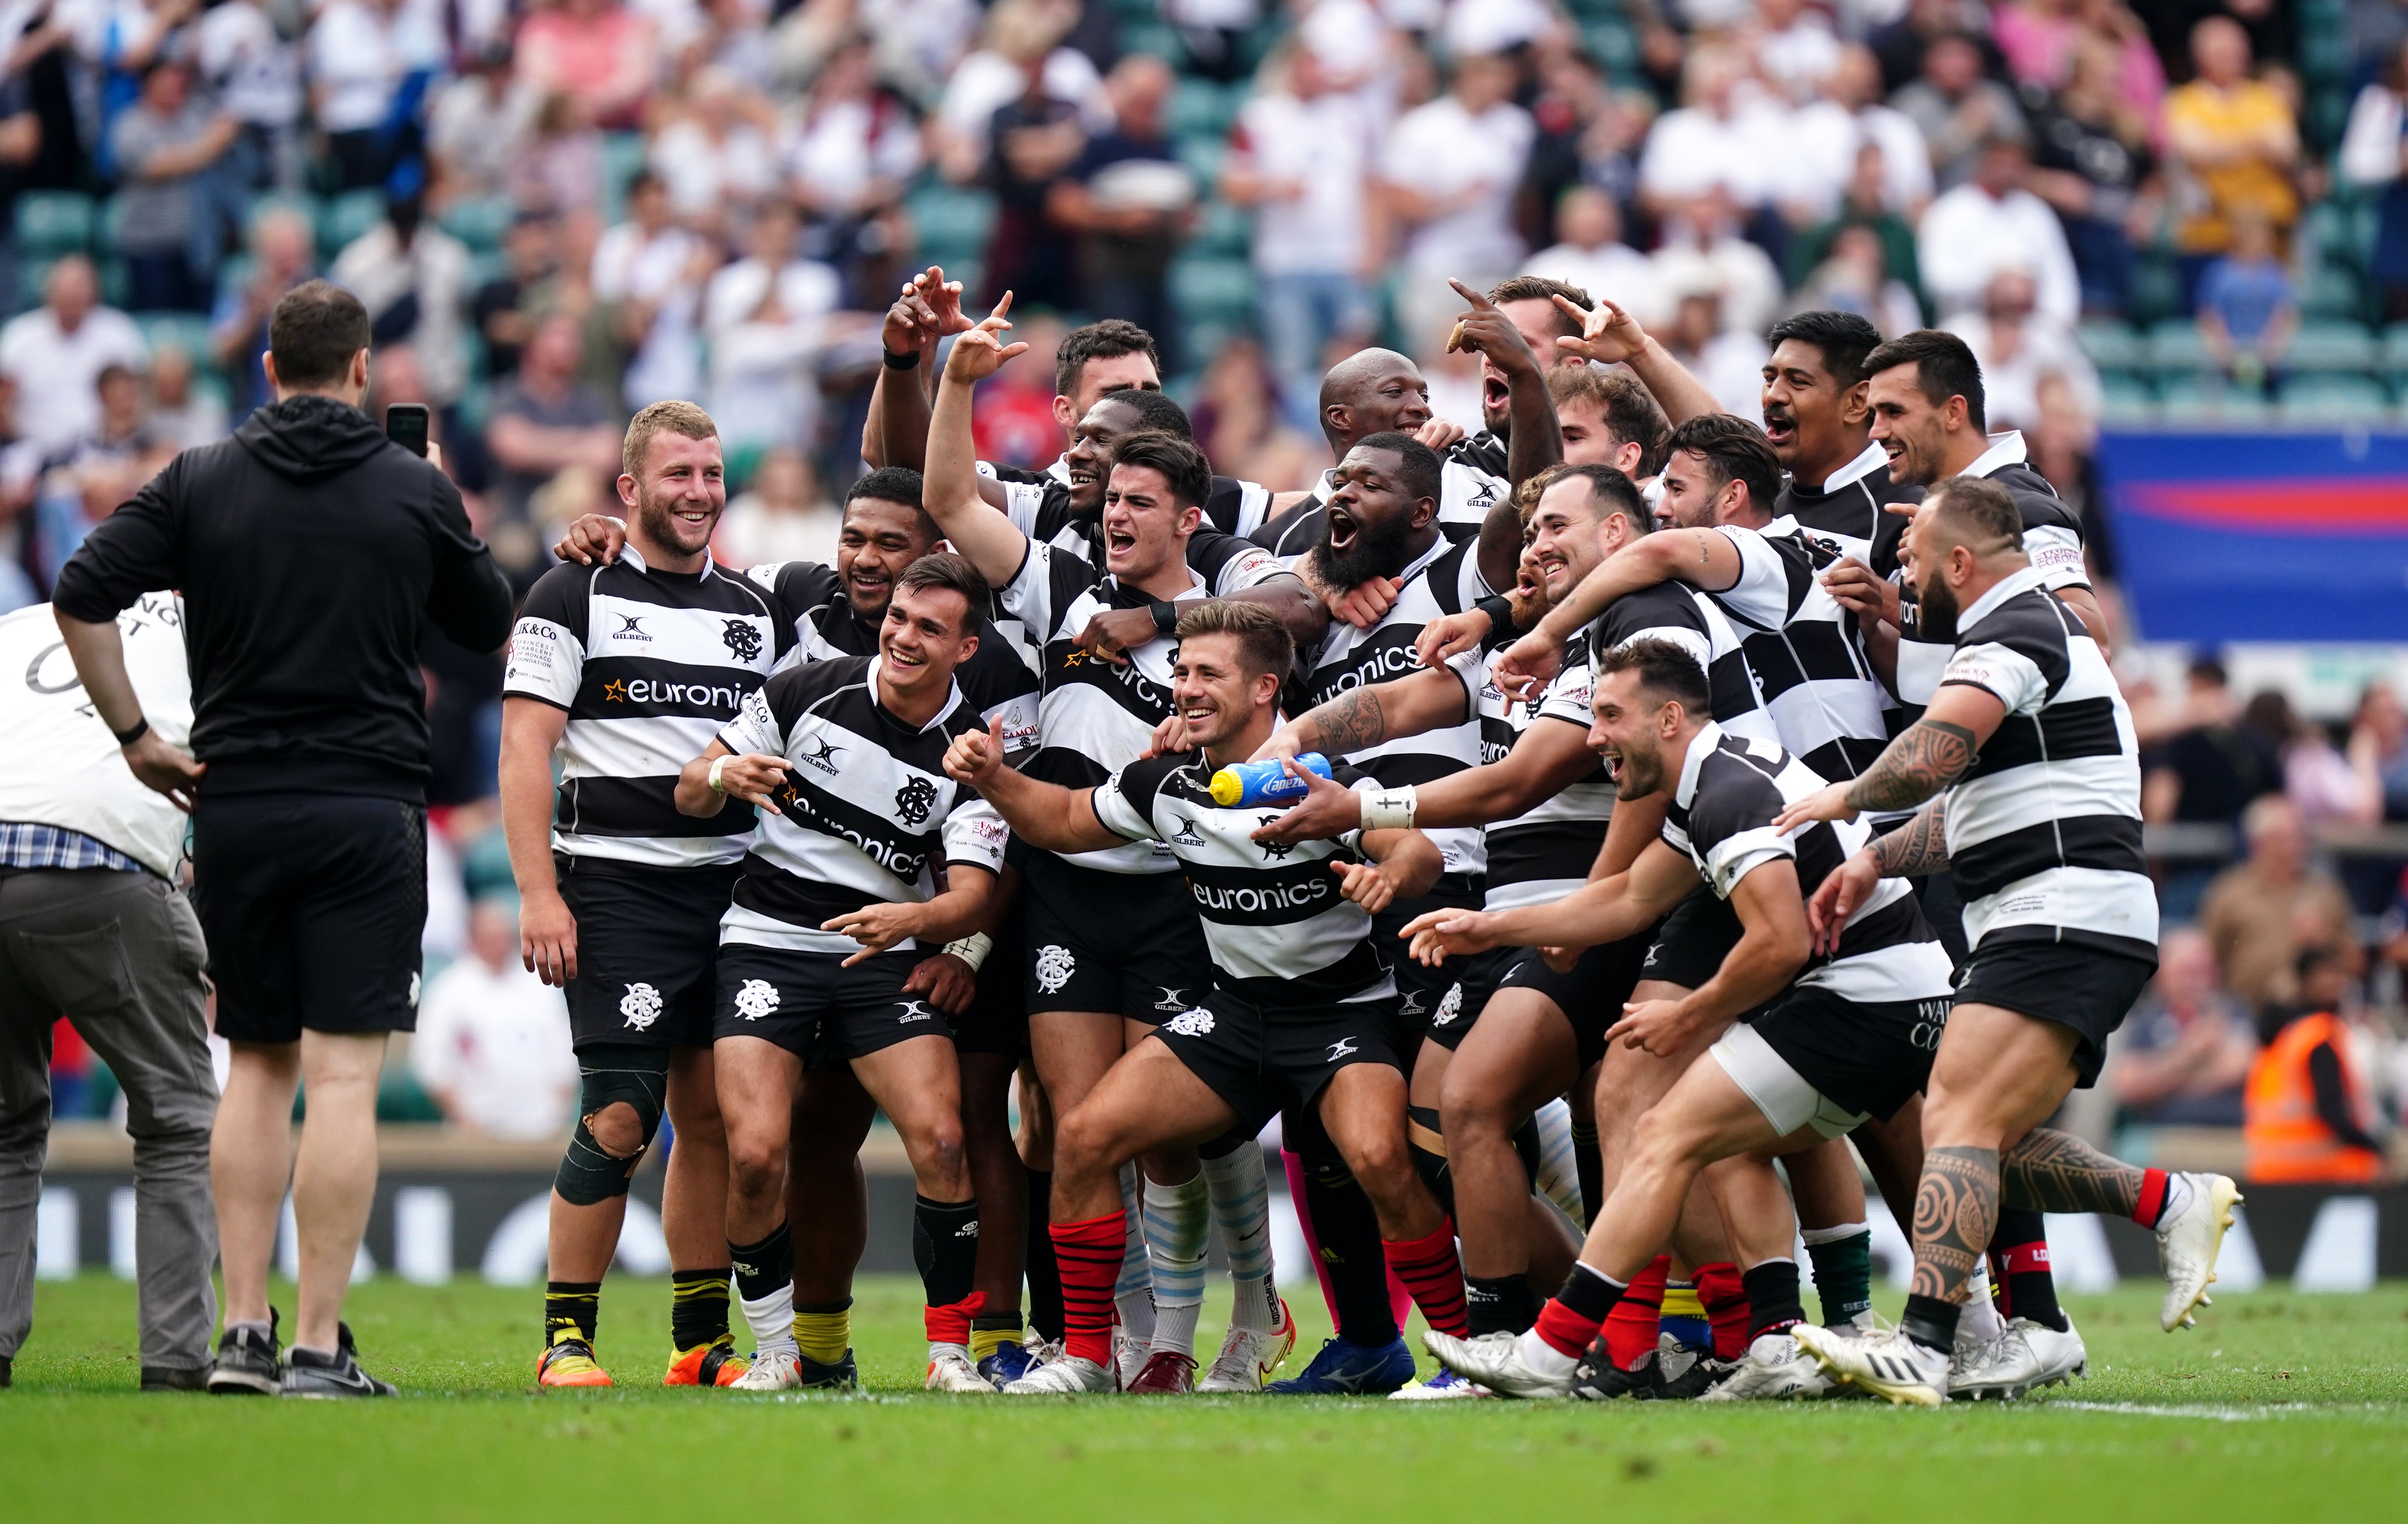 The Barbarians celebrate after their victory at Twickenham